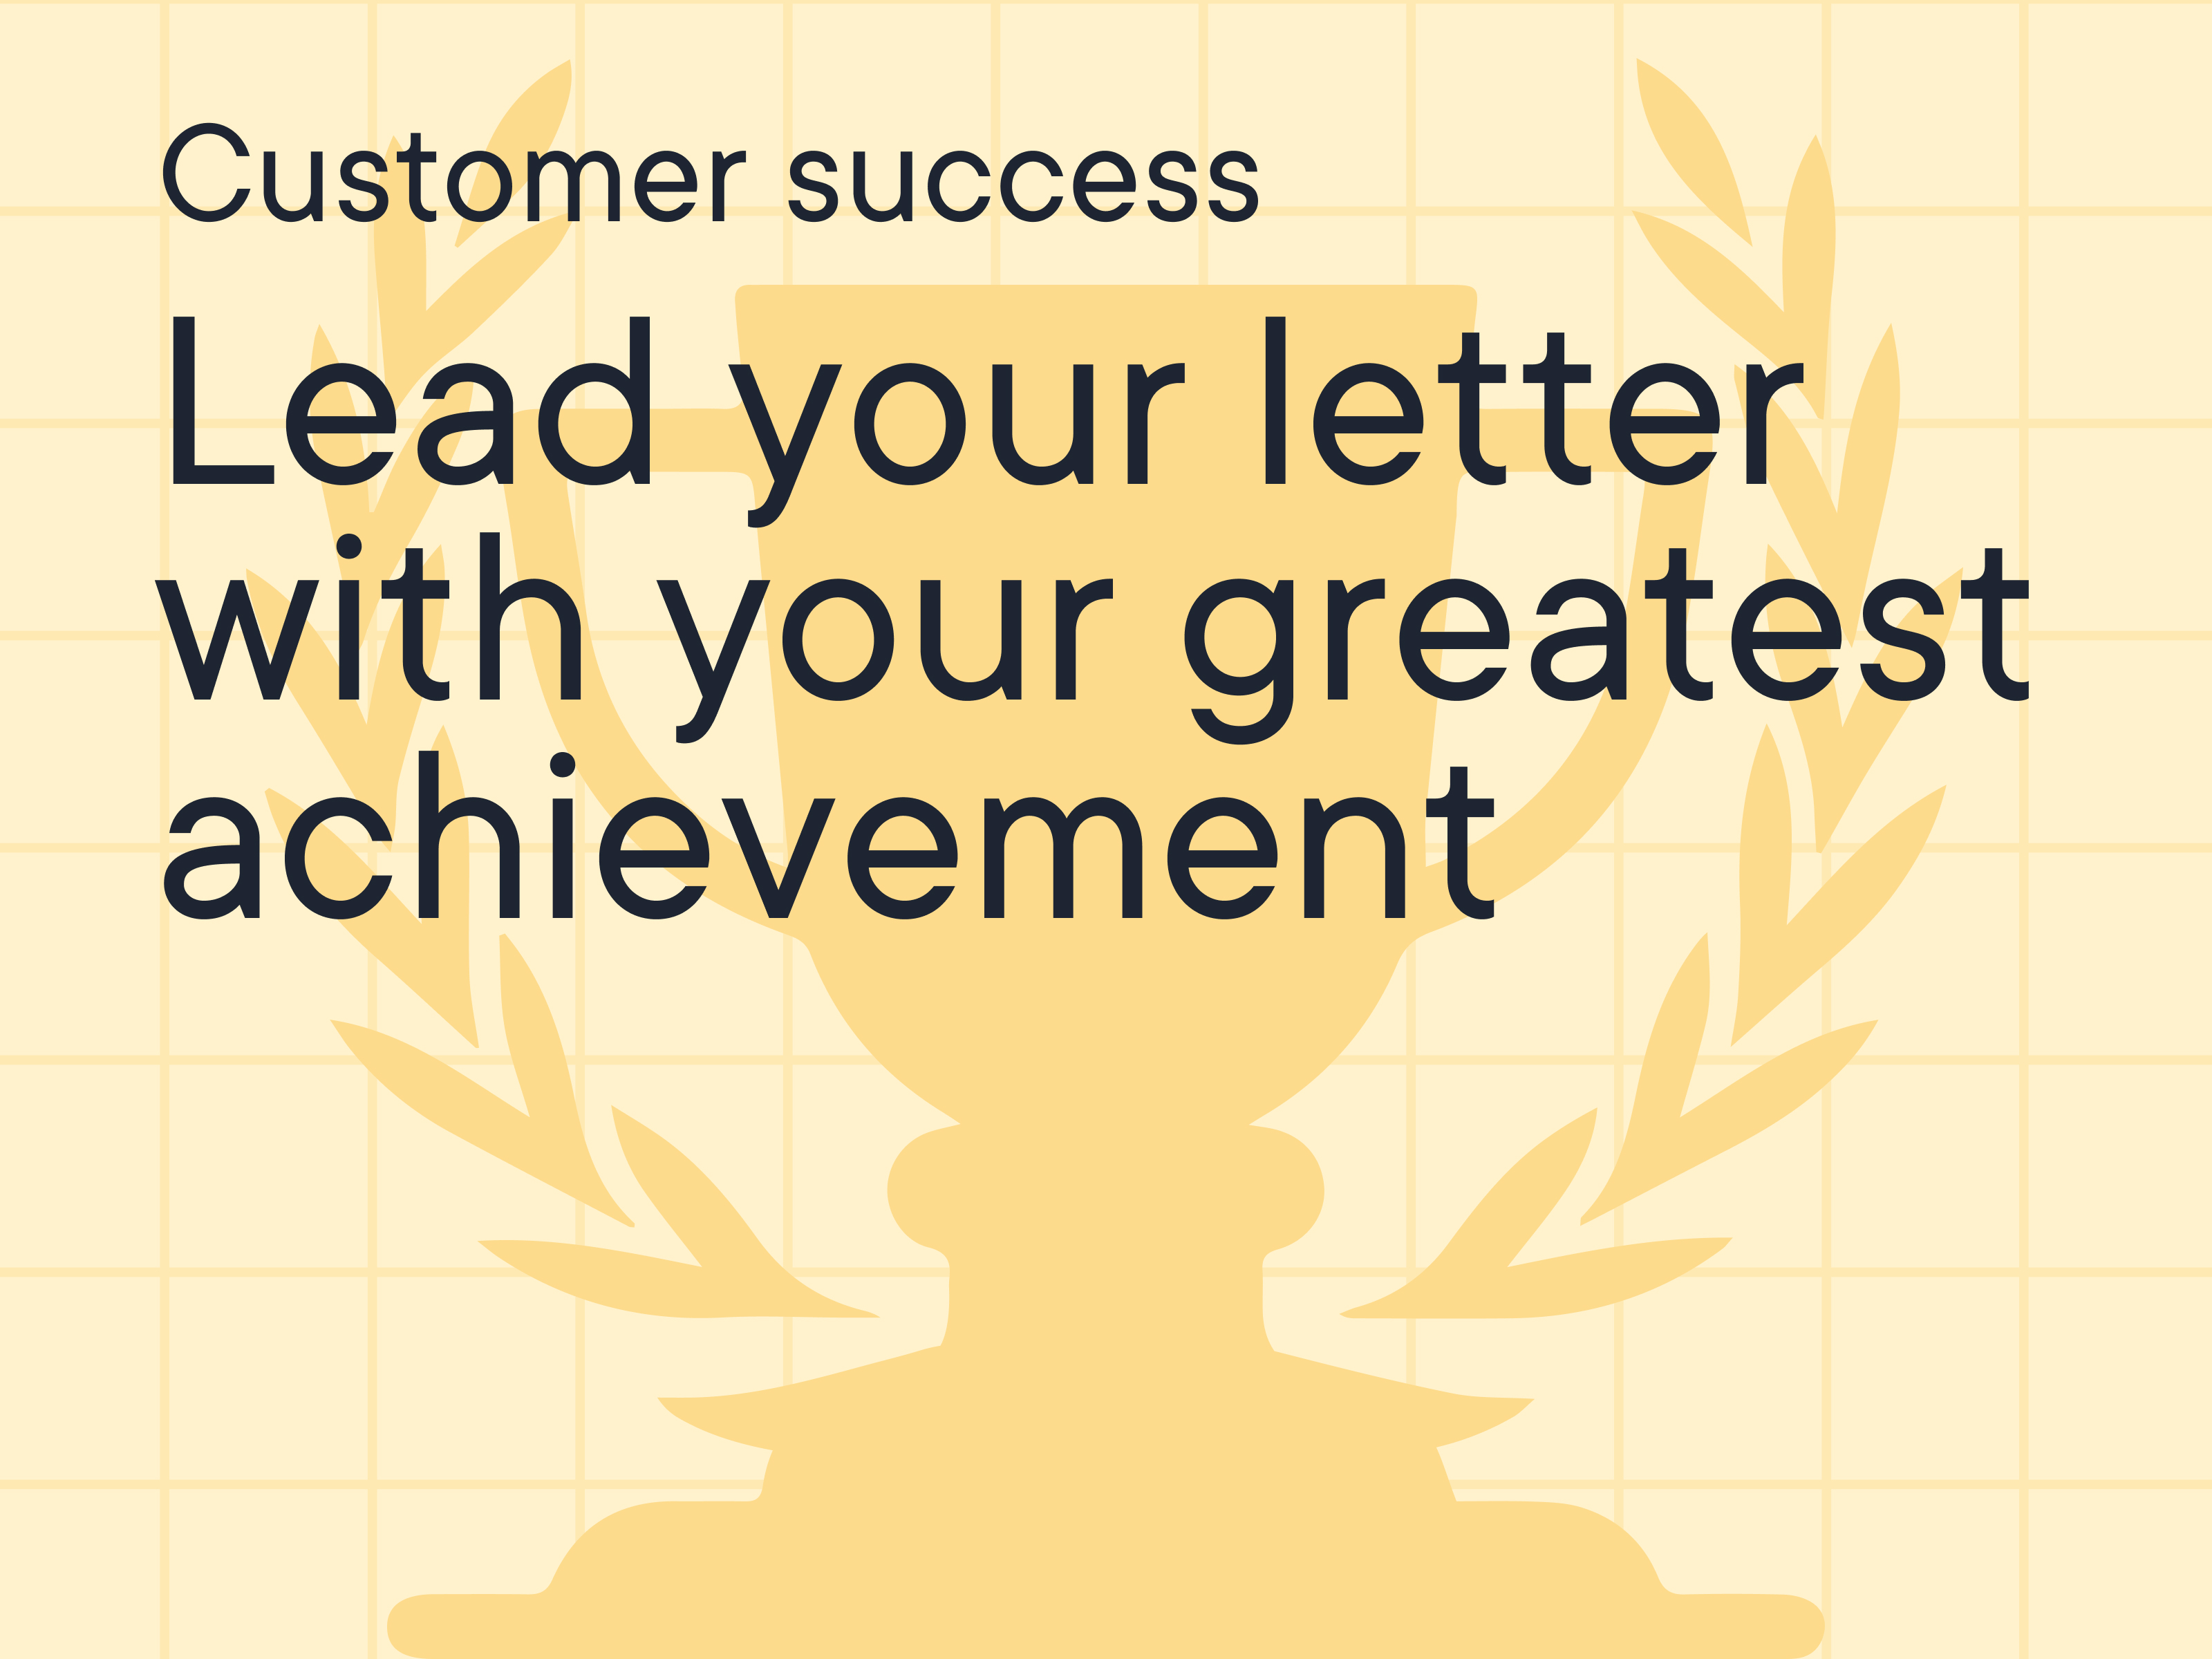 Lead your letter with your greatest achievement